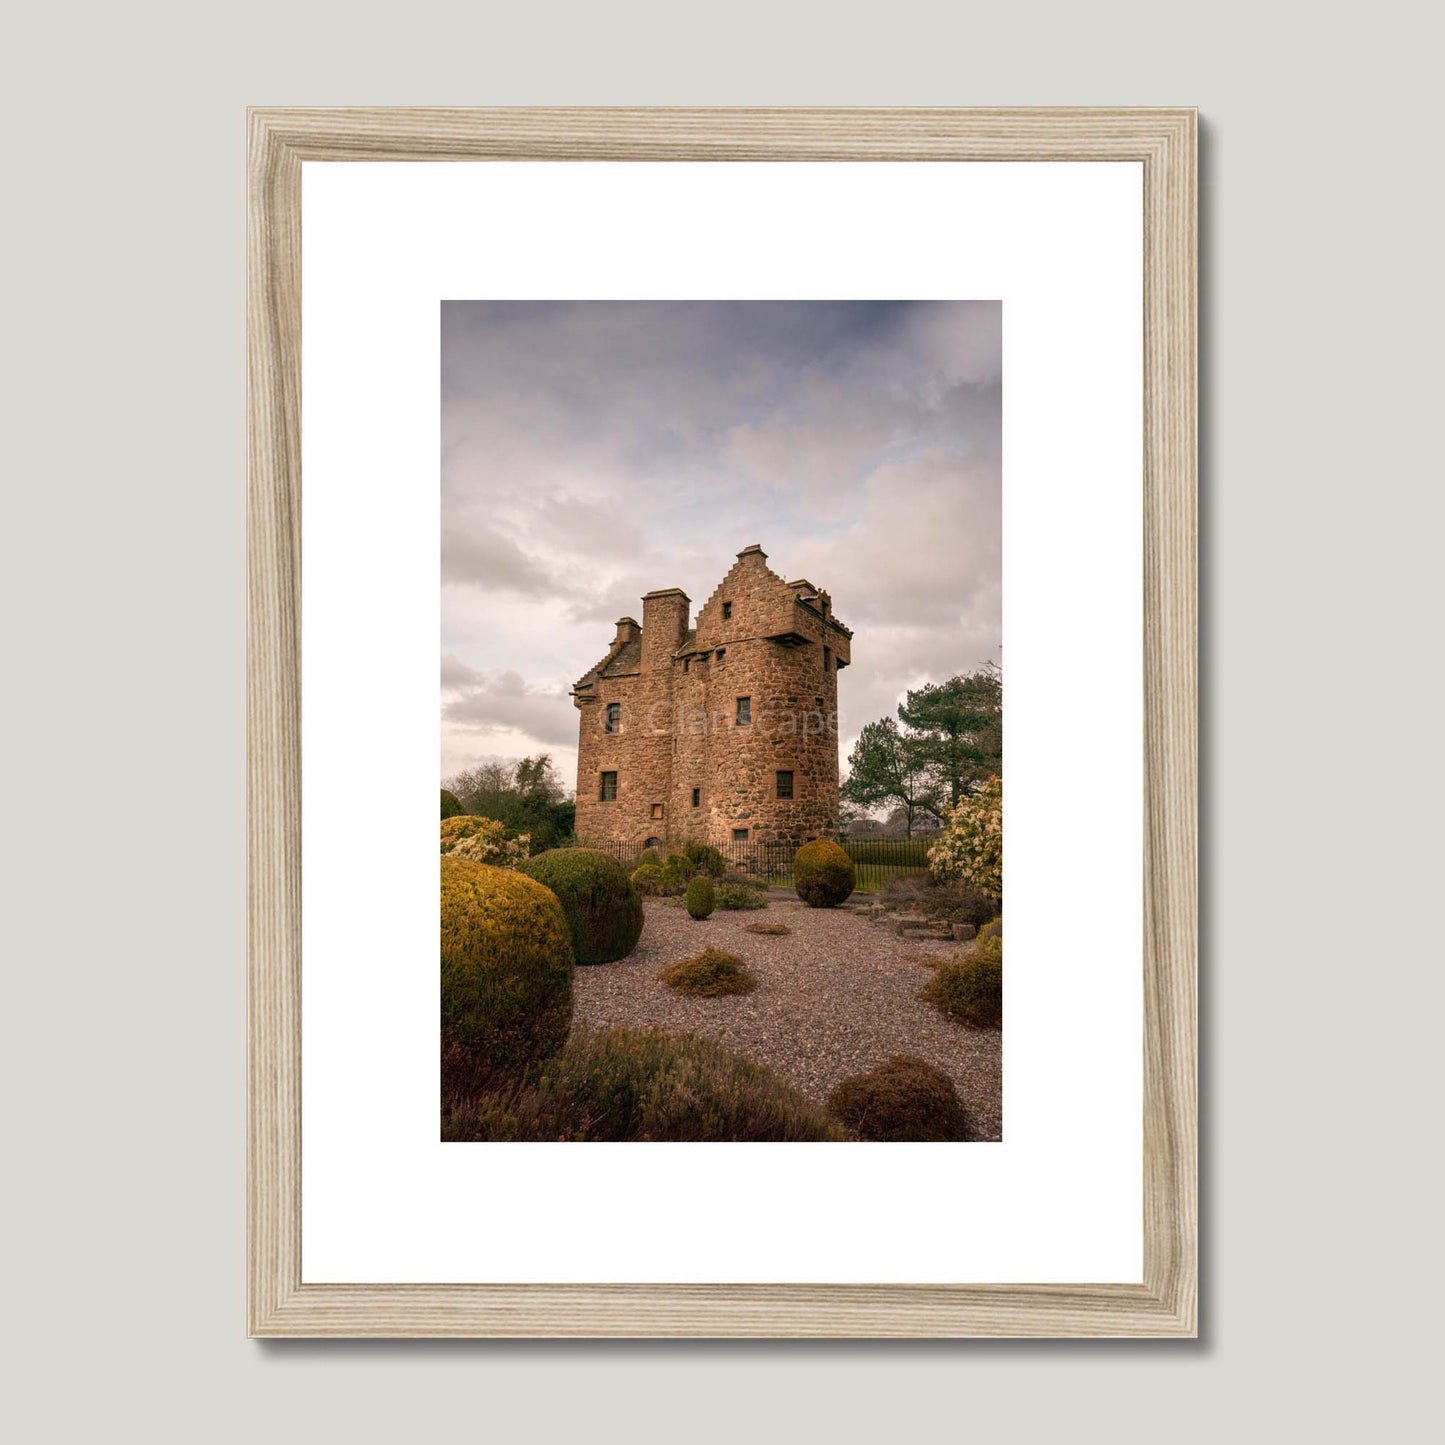 Clan Graham - Claypotts Castle - Framed & Mounted Photo Print 12"x16" Natural